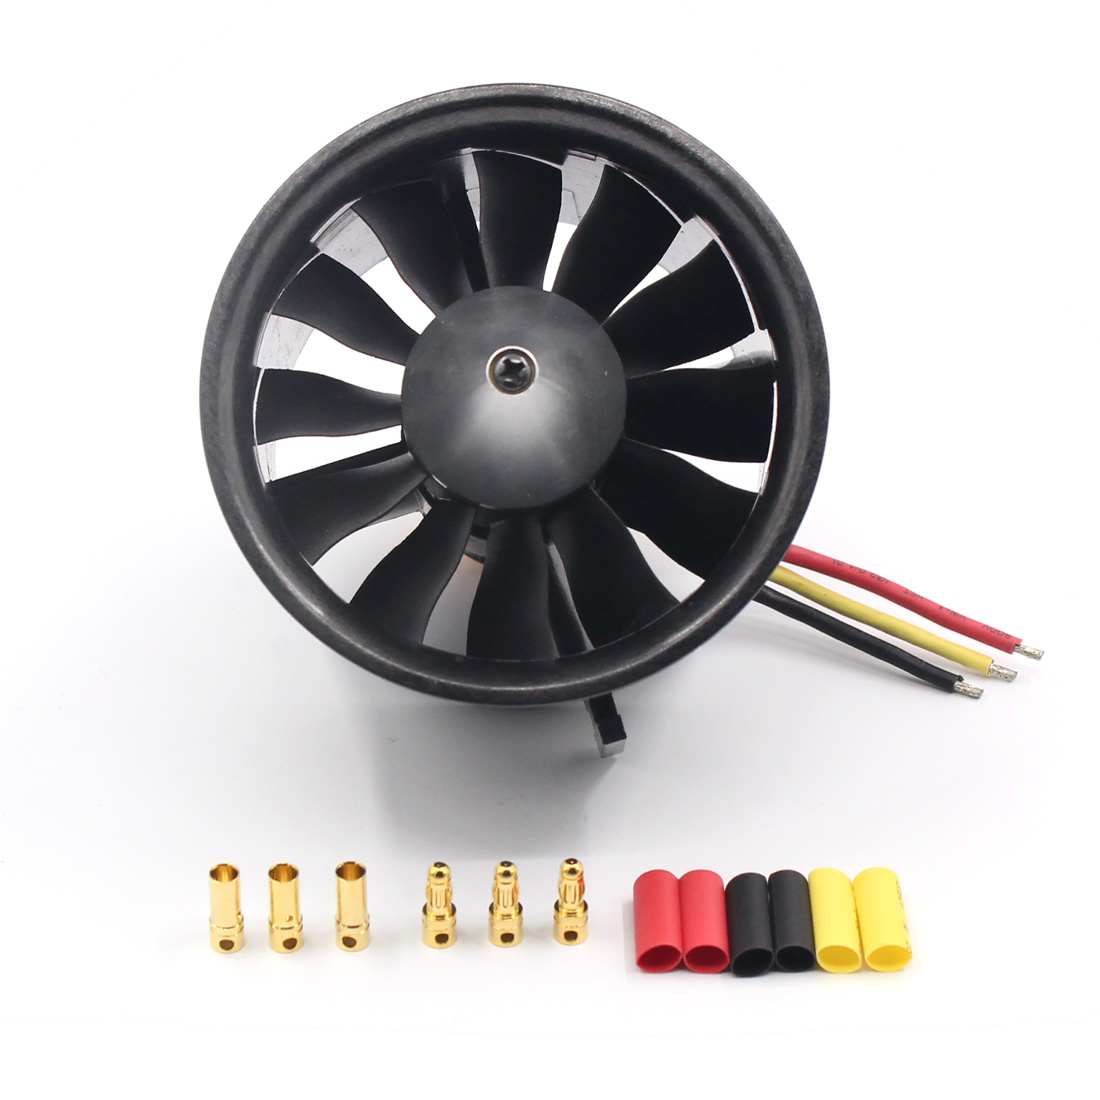 US$ 20.14 - QX 70mm 12 Blades EDF Ducted Fan 4S Motor QF2827